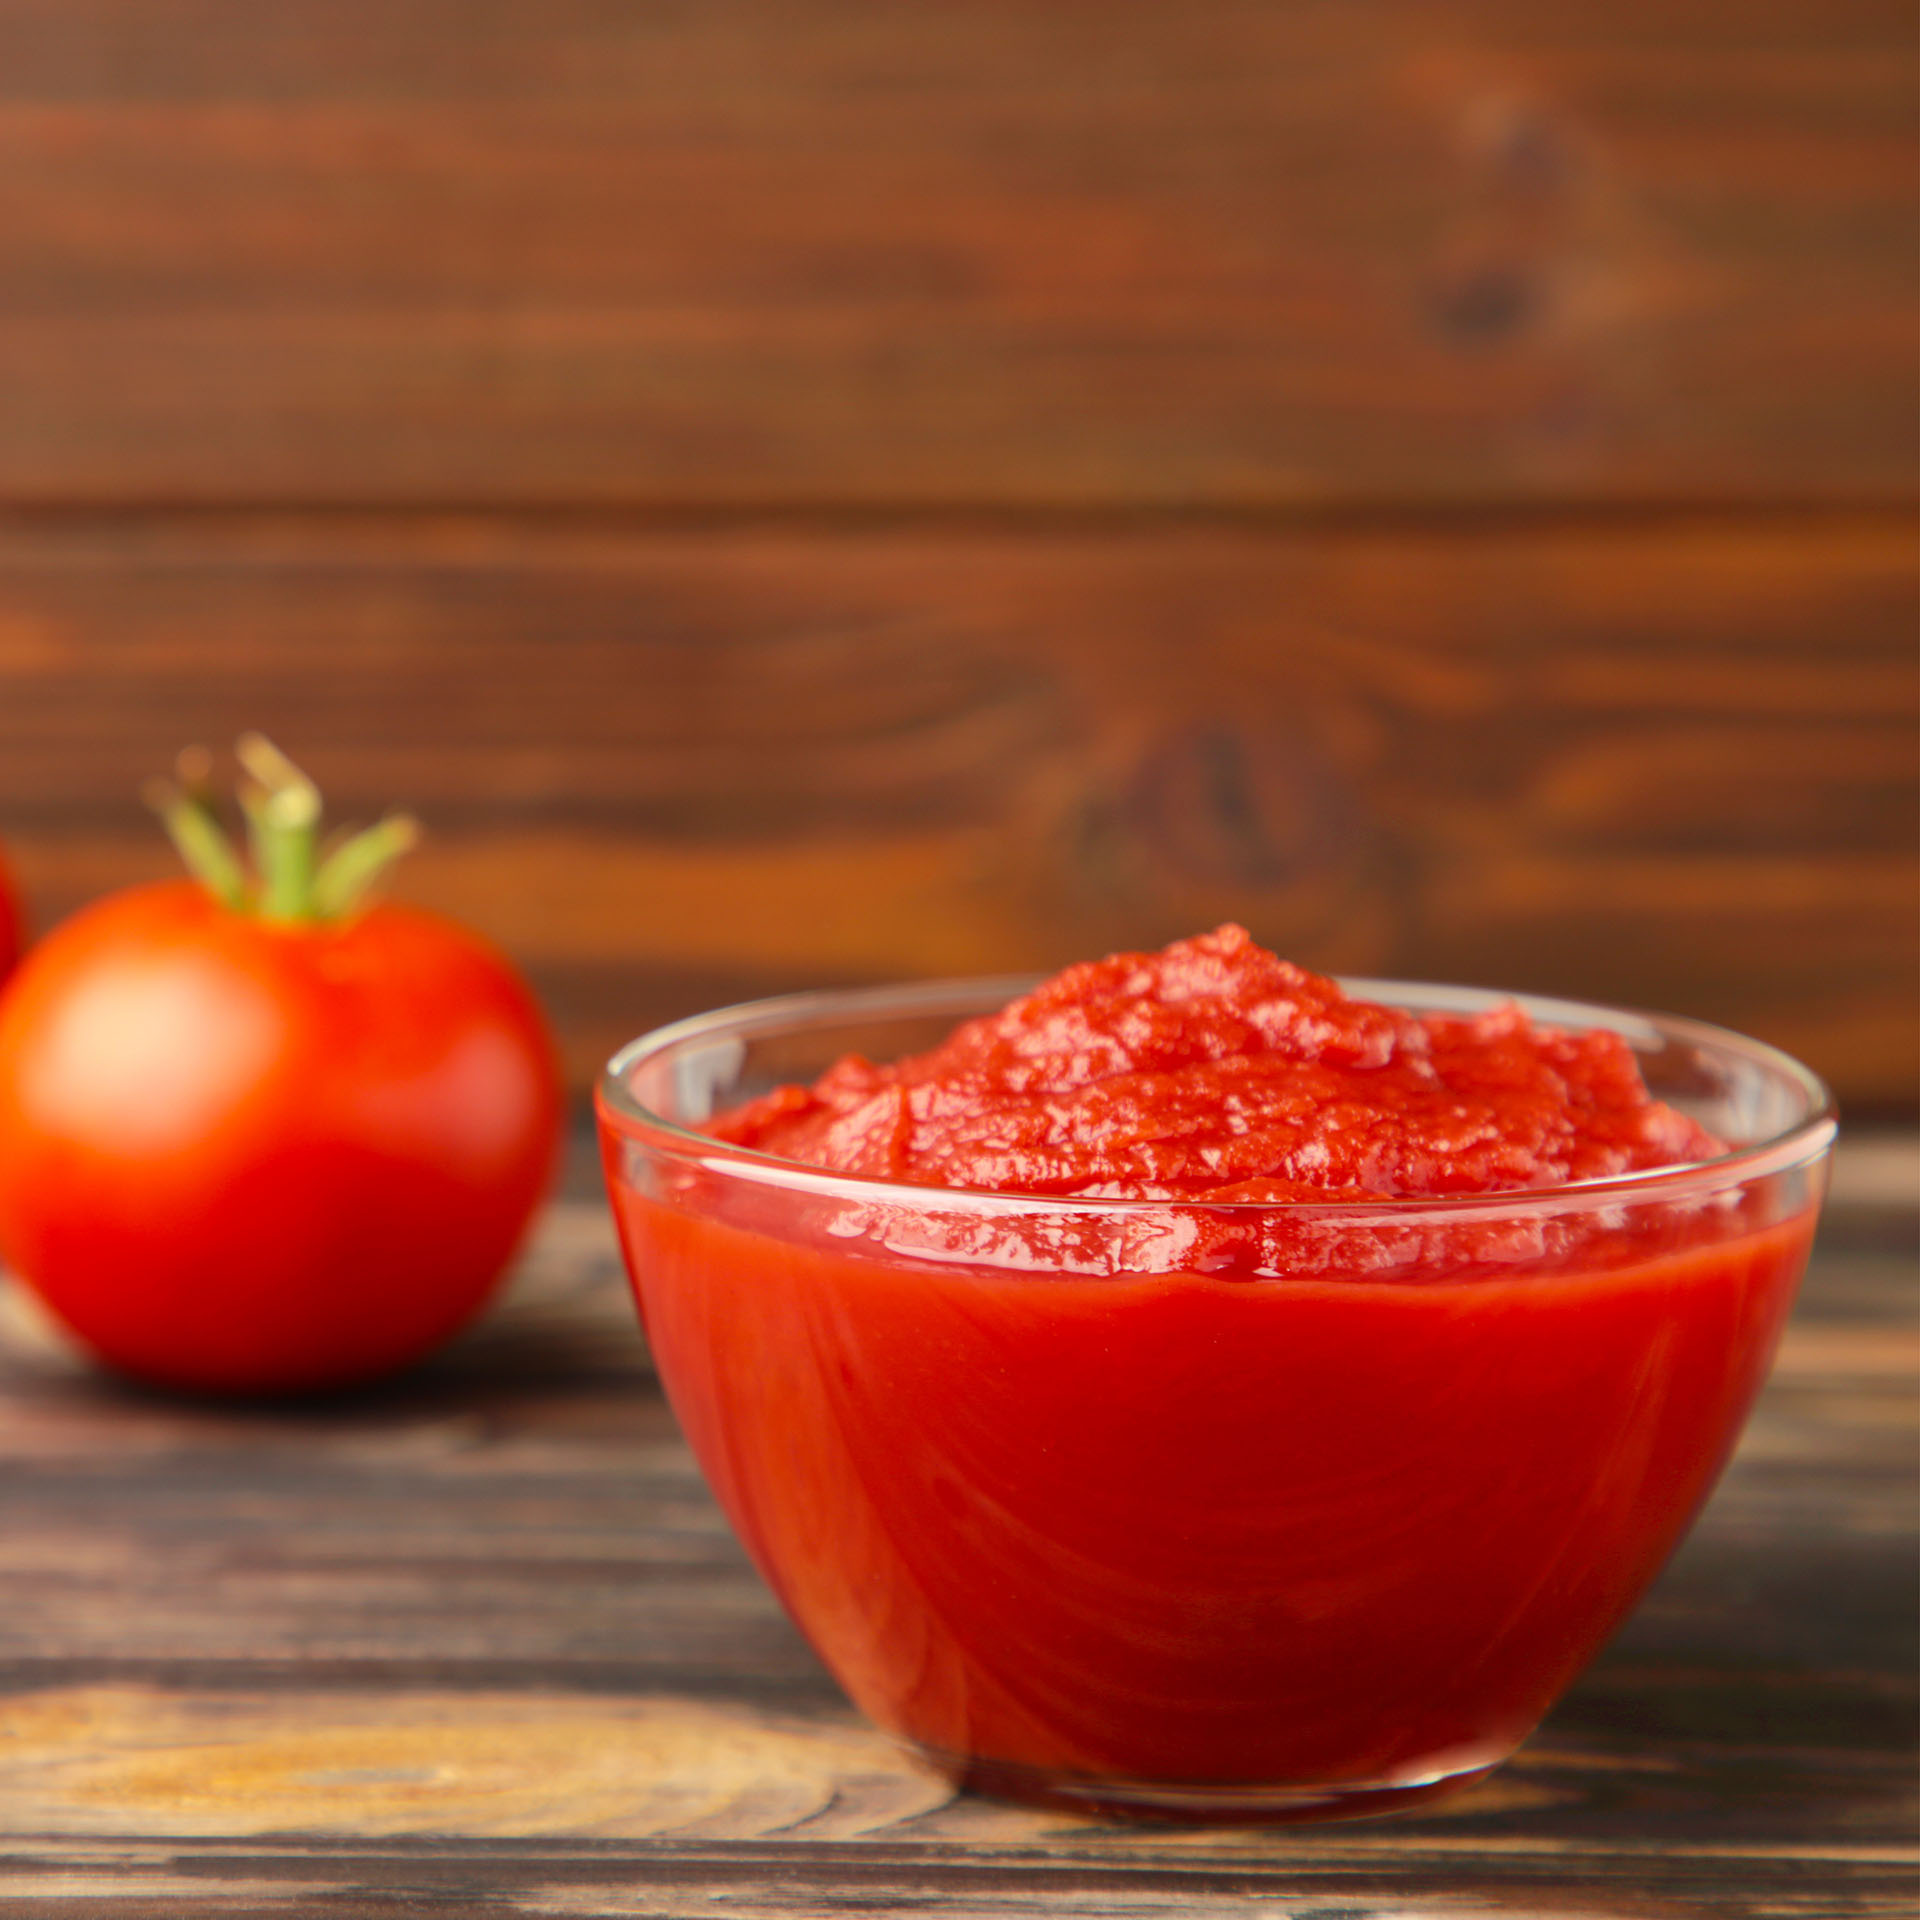 Tomato ketchup sauce in a bowl with tomatoes on brown wooden background.